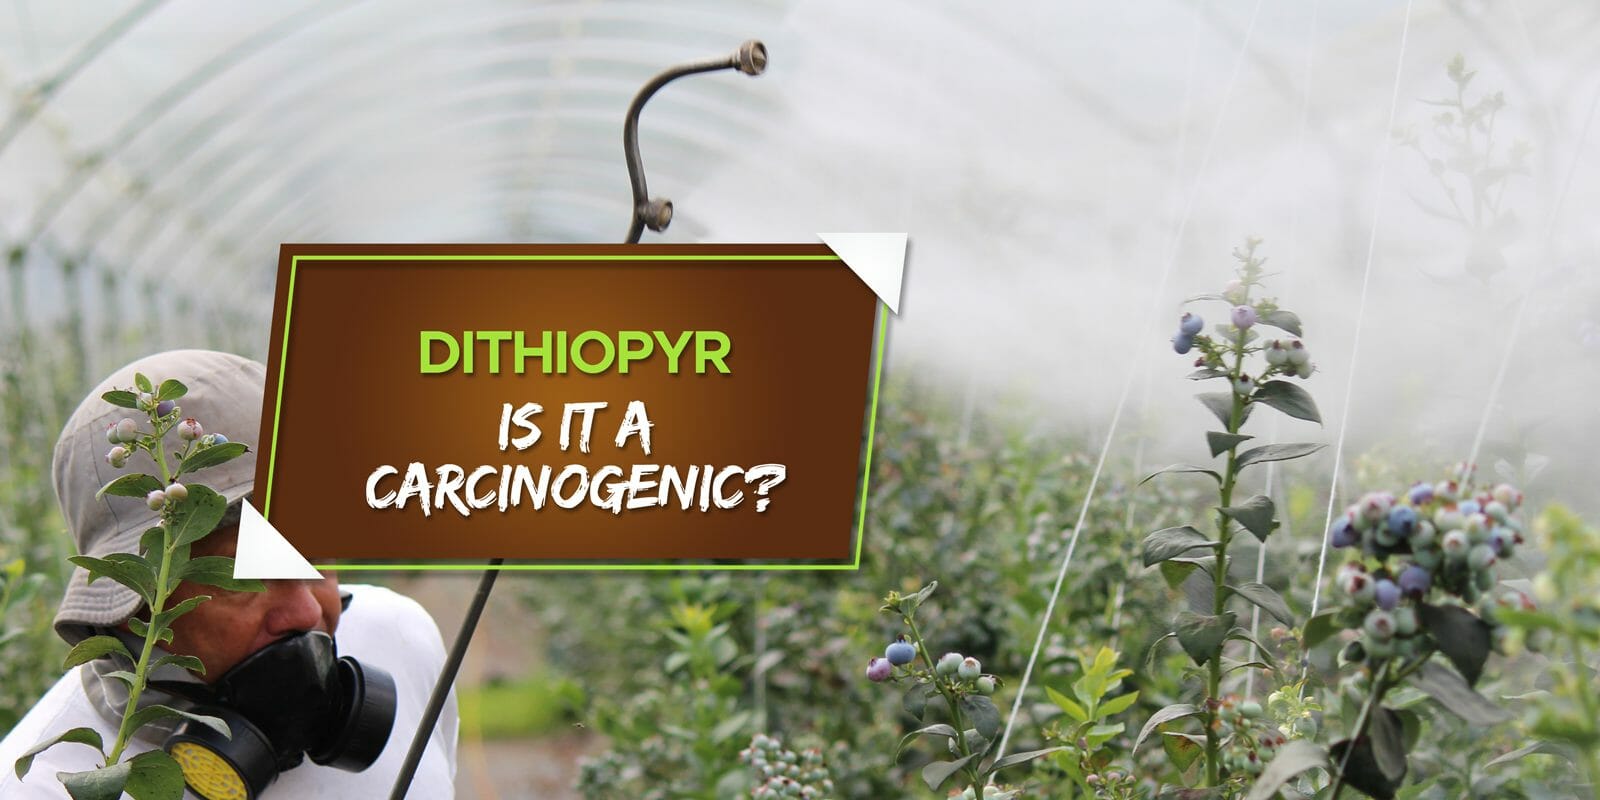 is dithiopyr a carcinogenic